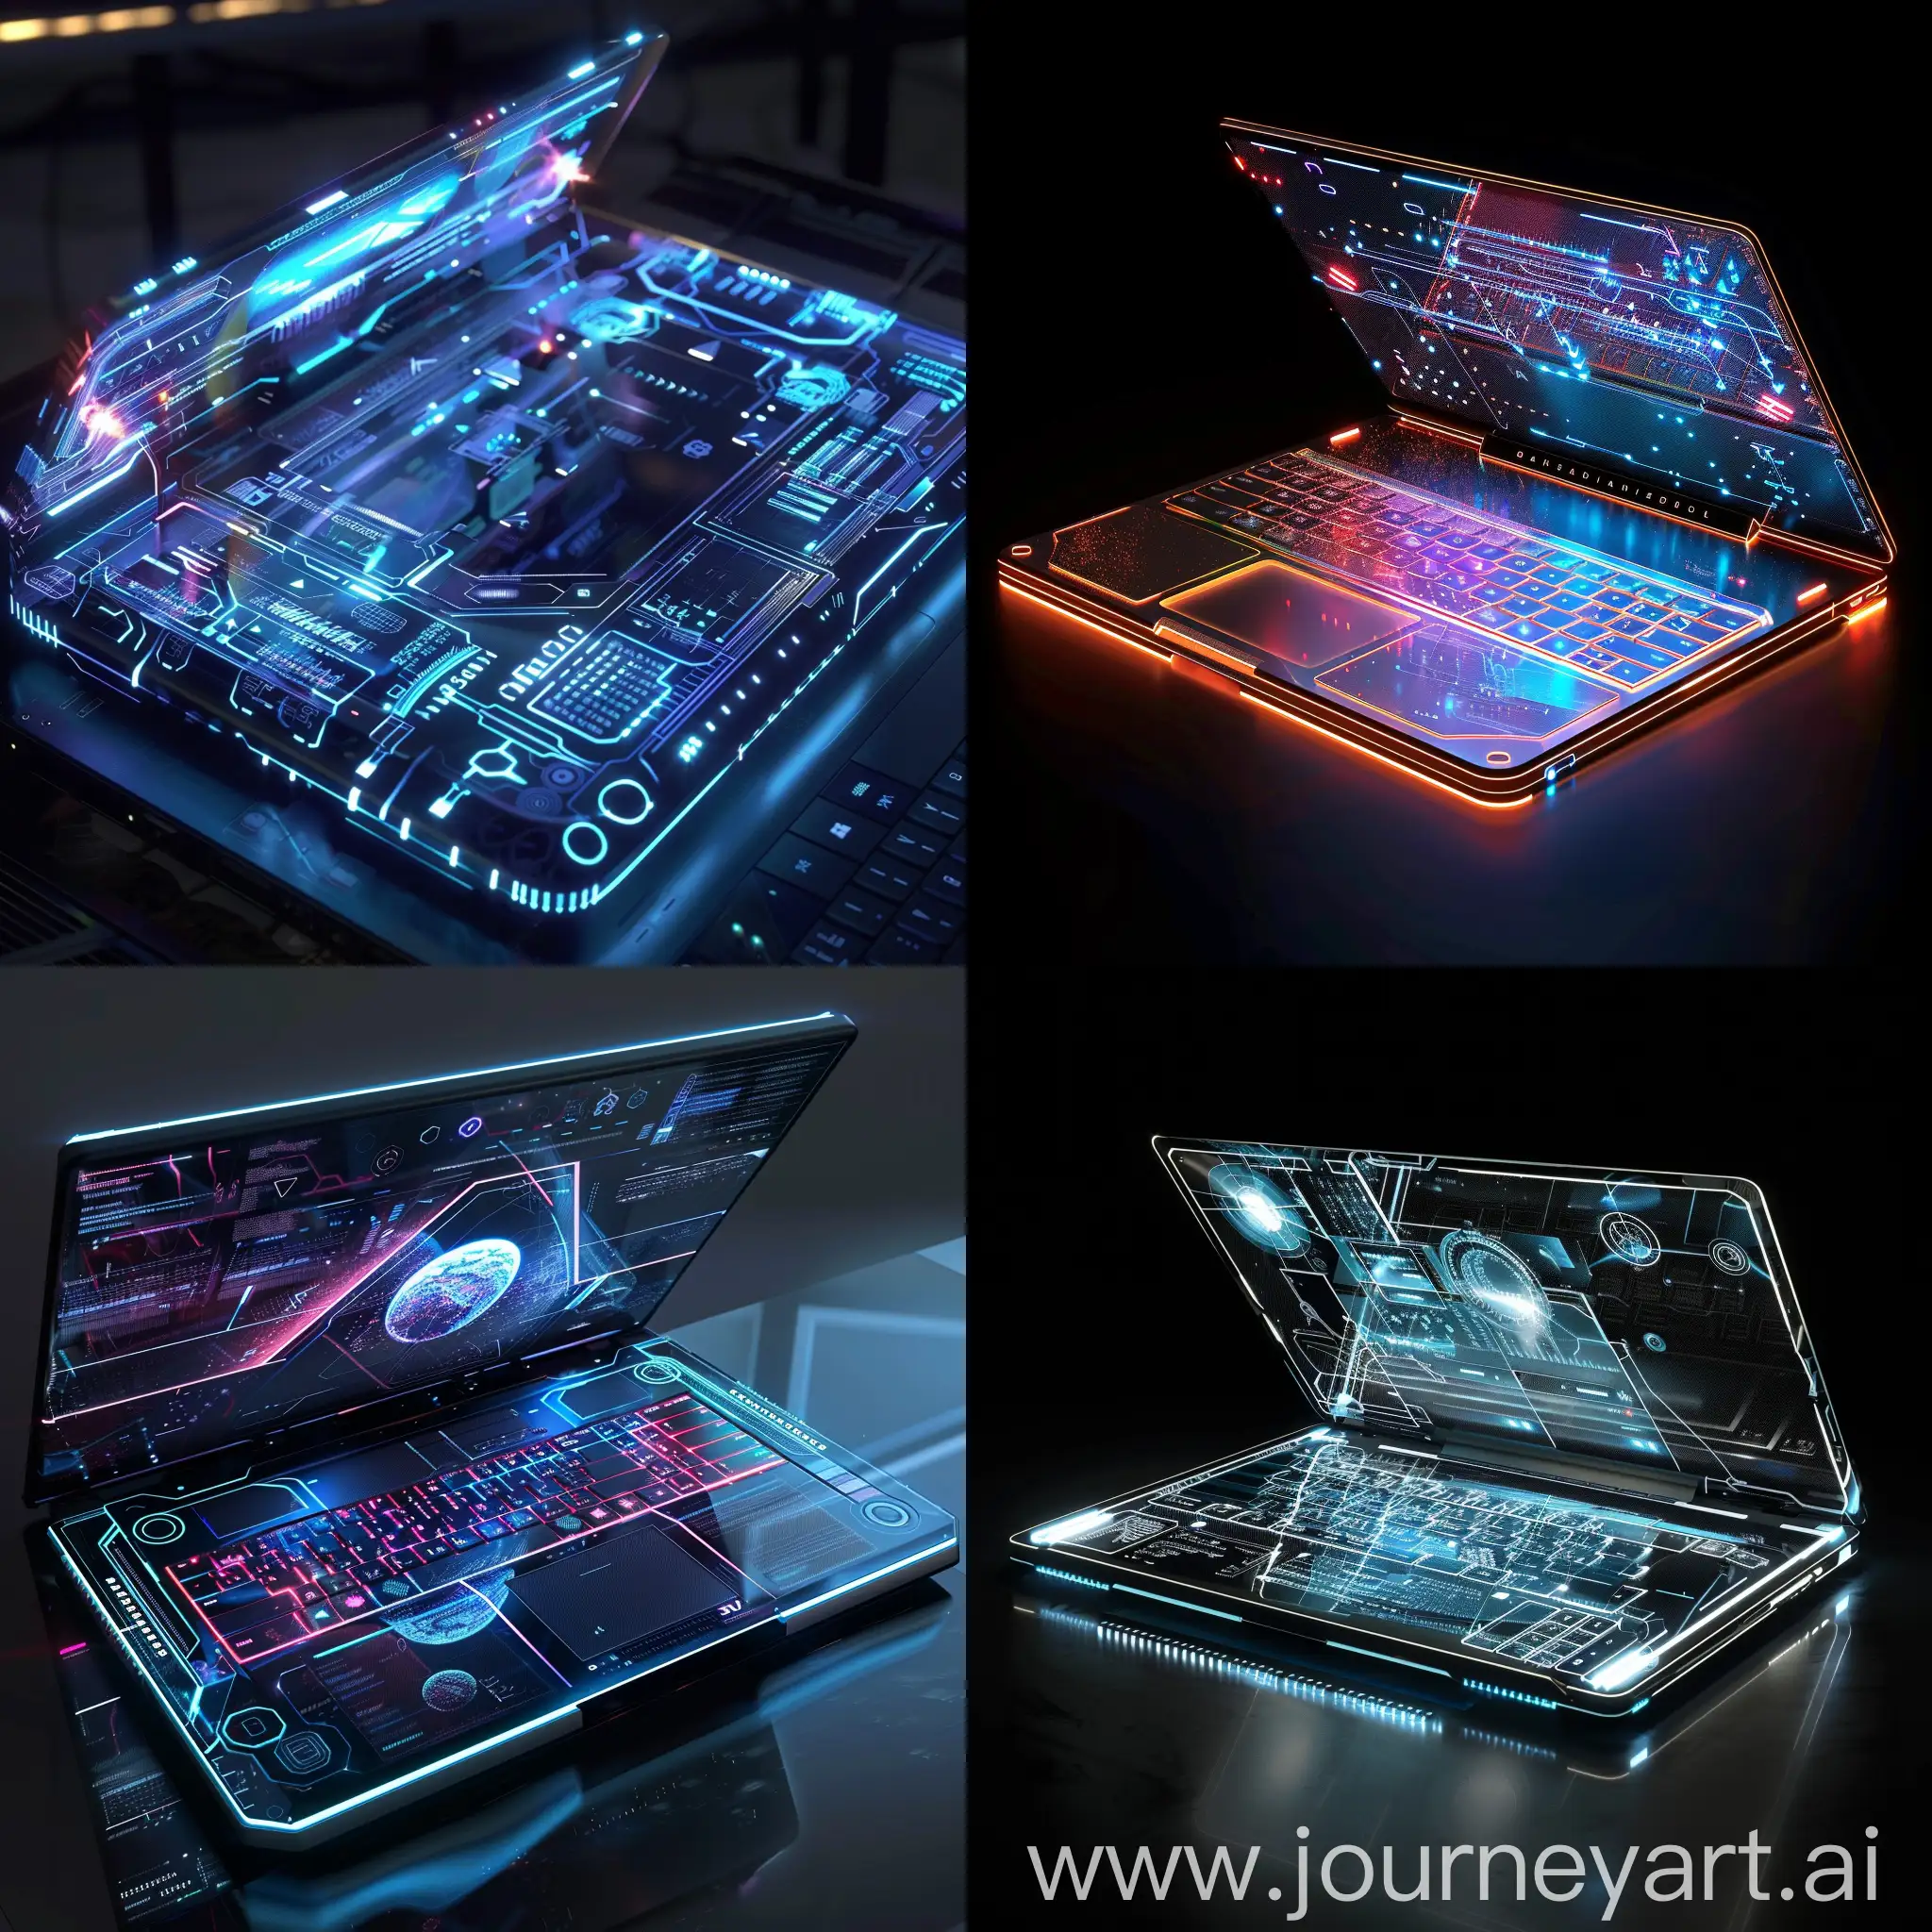 Futuristic-Laptop-with-Molecular-Memory-Storage-and-Holographic-Displays